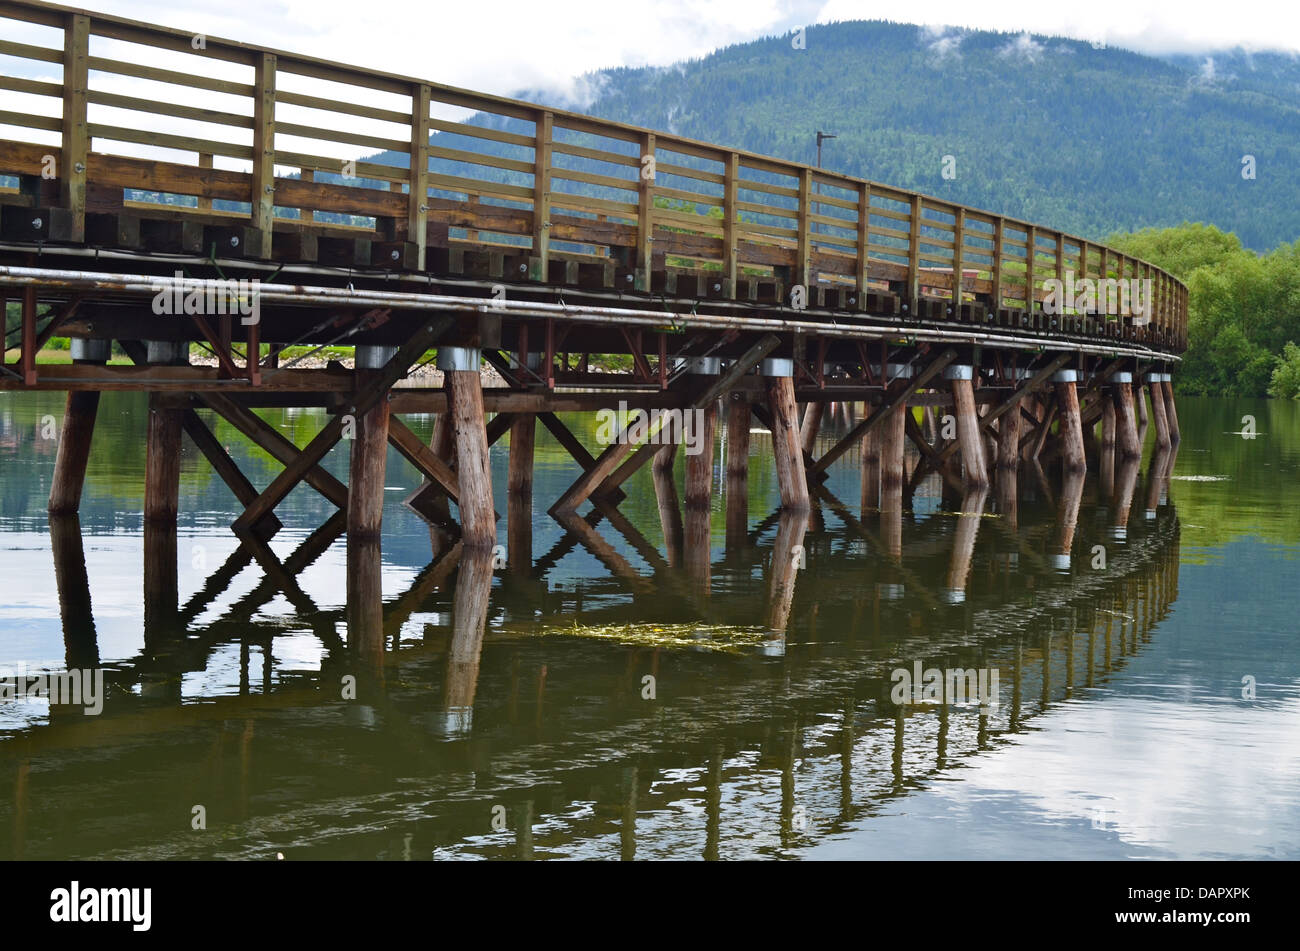 Longest wooden dock over fresh water in Canada.  Located in Sicamous British Columbia. Stock Photo